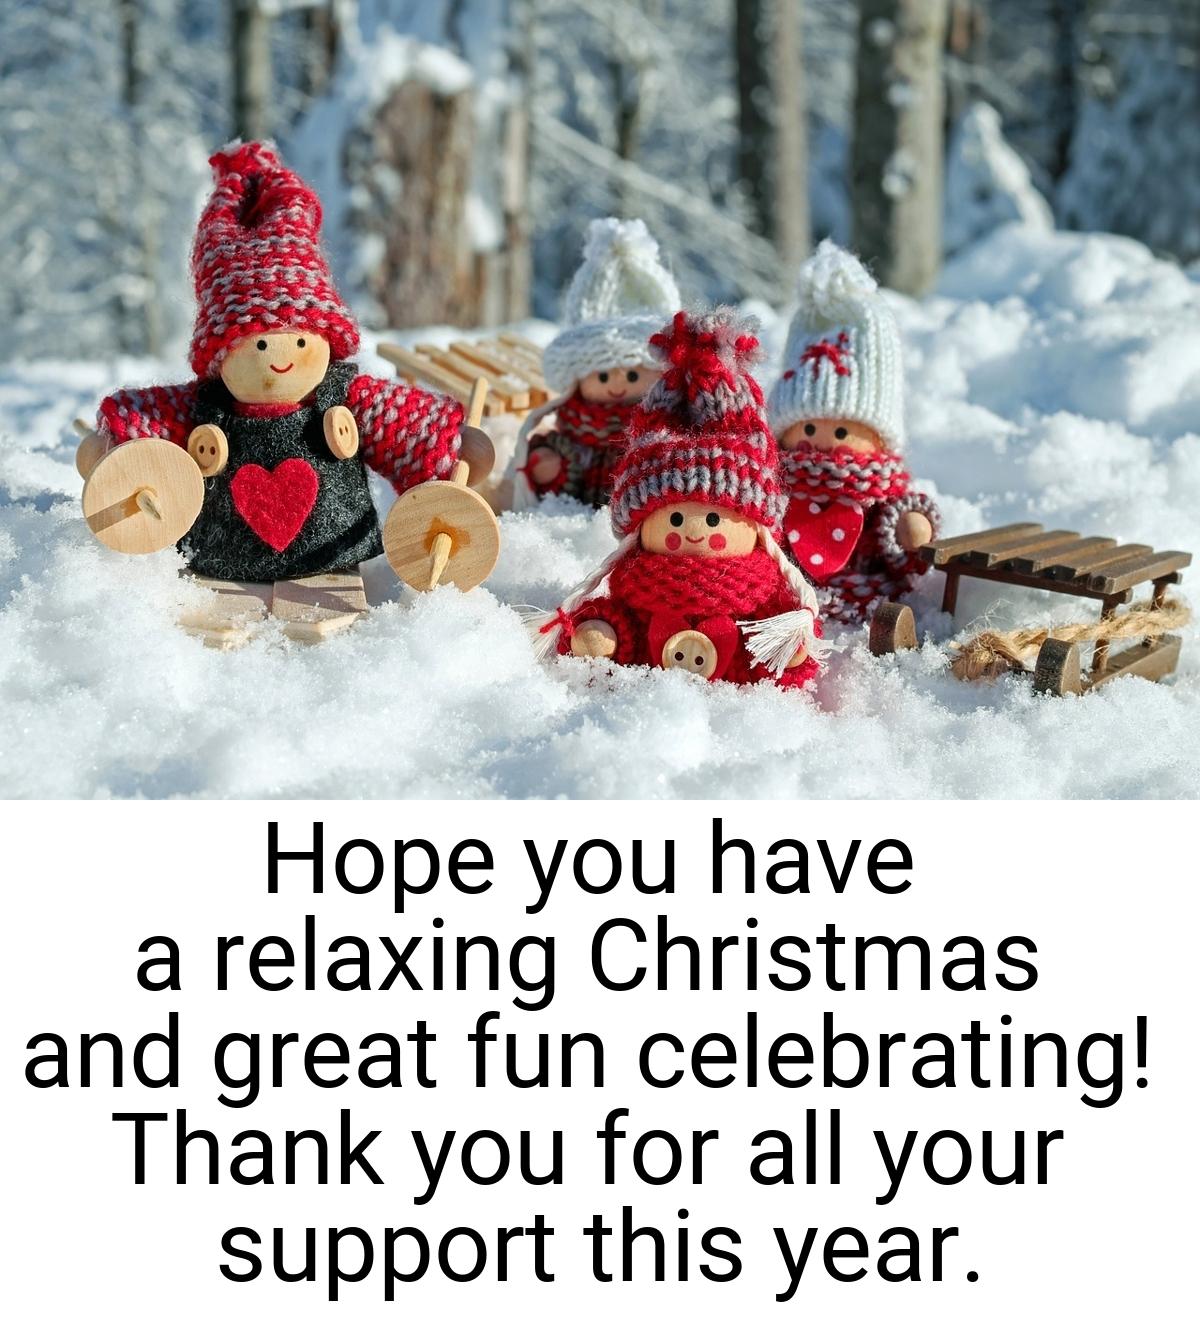 Hope you have a relaxing Christmas and great fun